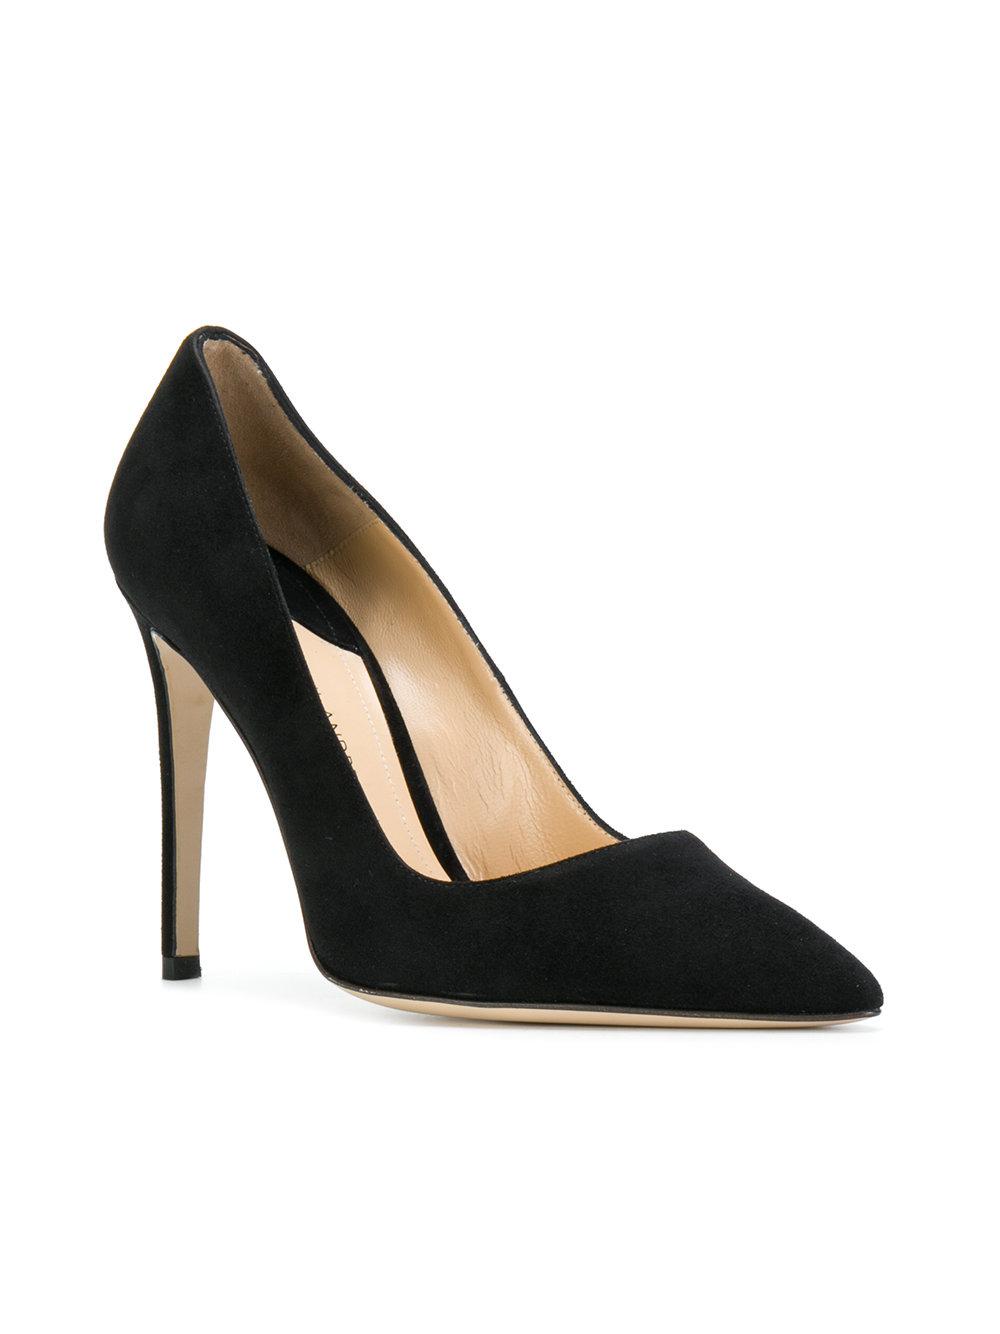 Paul Andrew Suede Pointed Toe Pumps in Black - Lyst